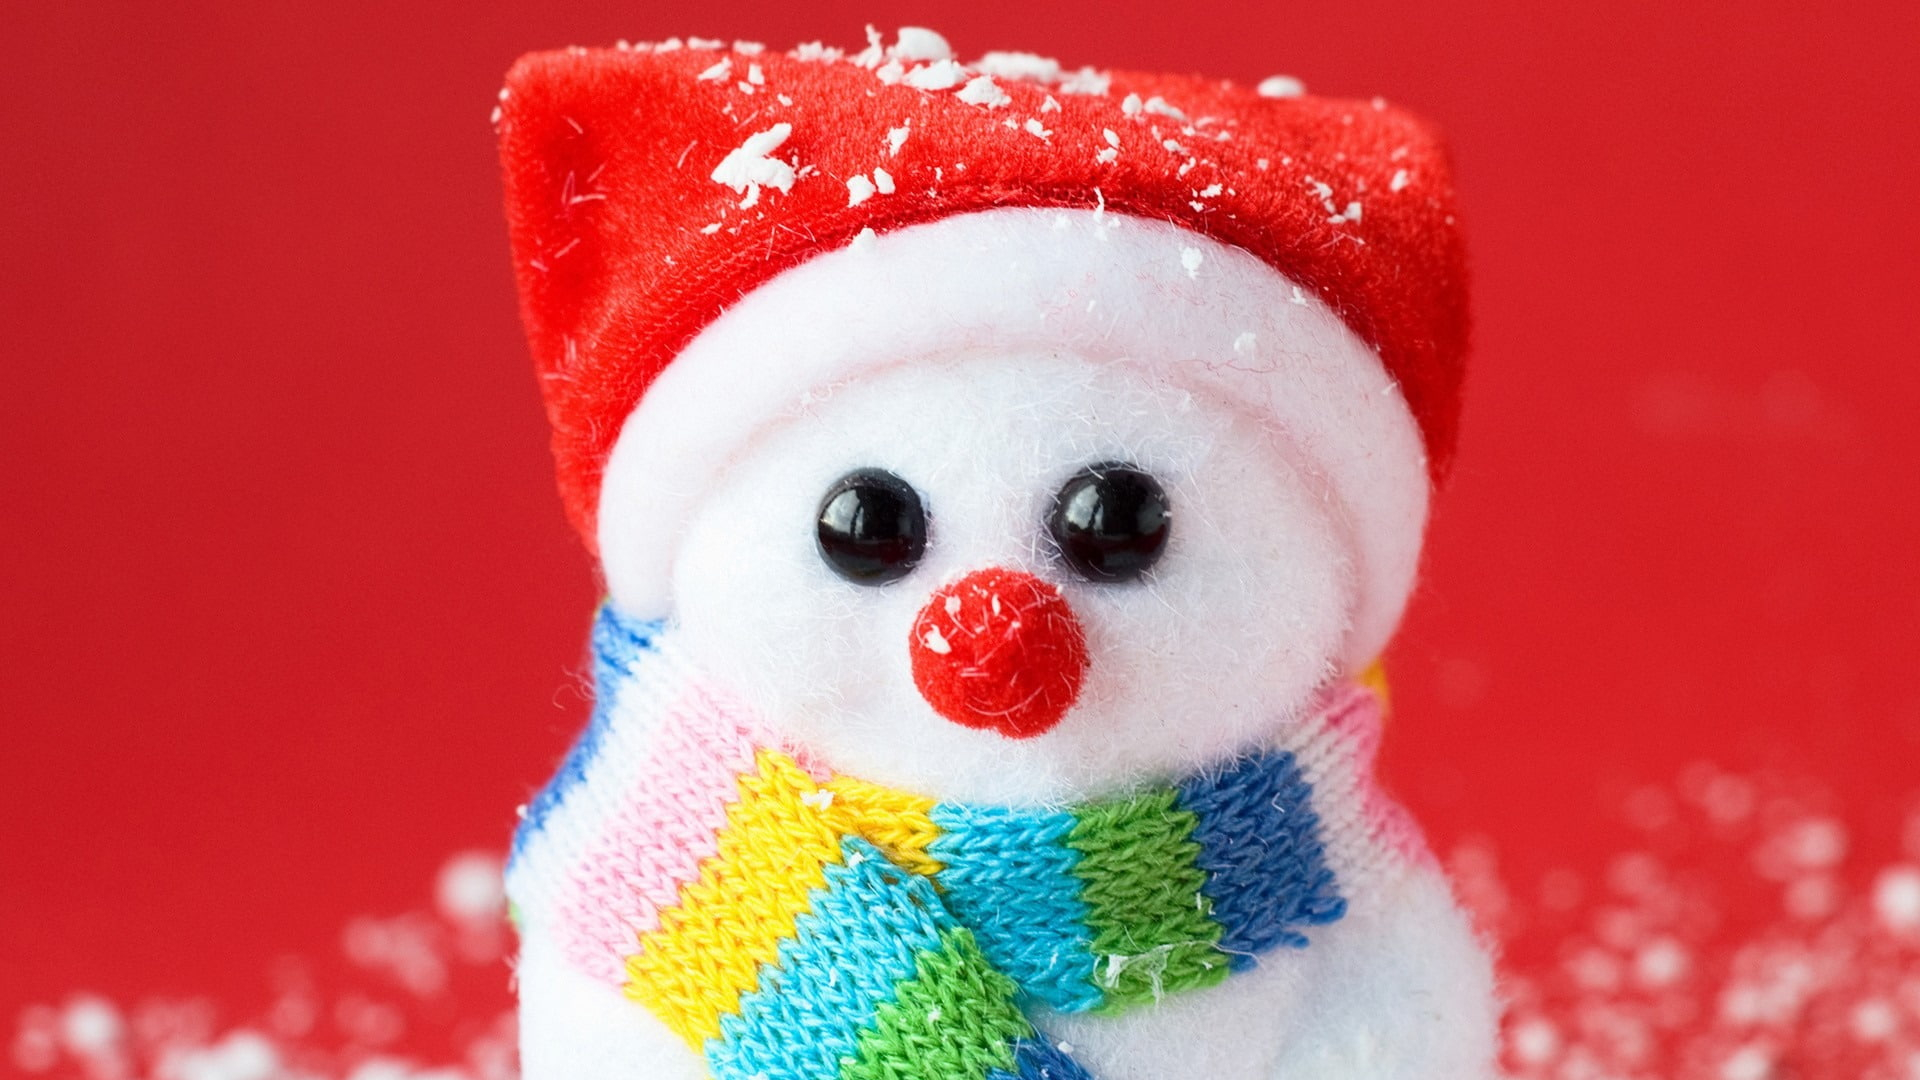 pictures of real snowman in hd